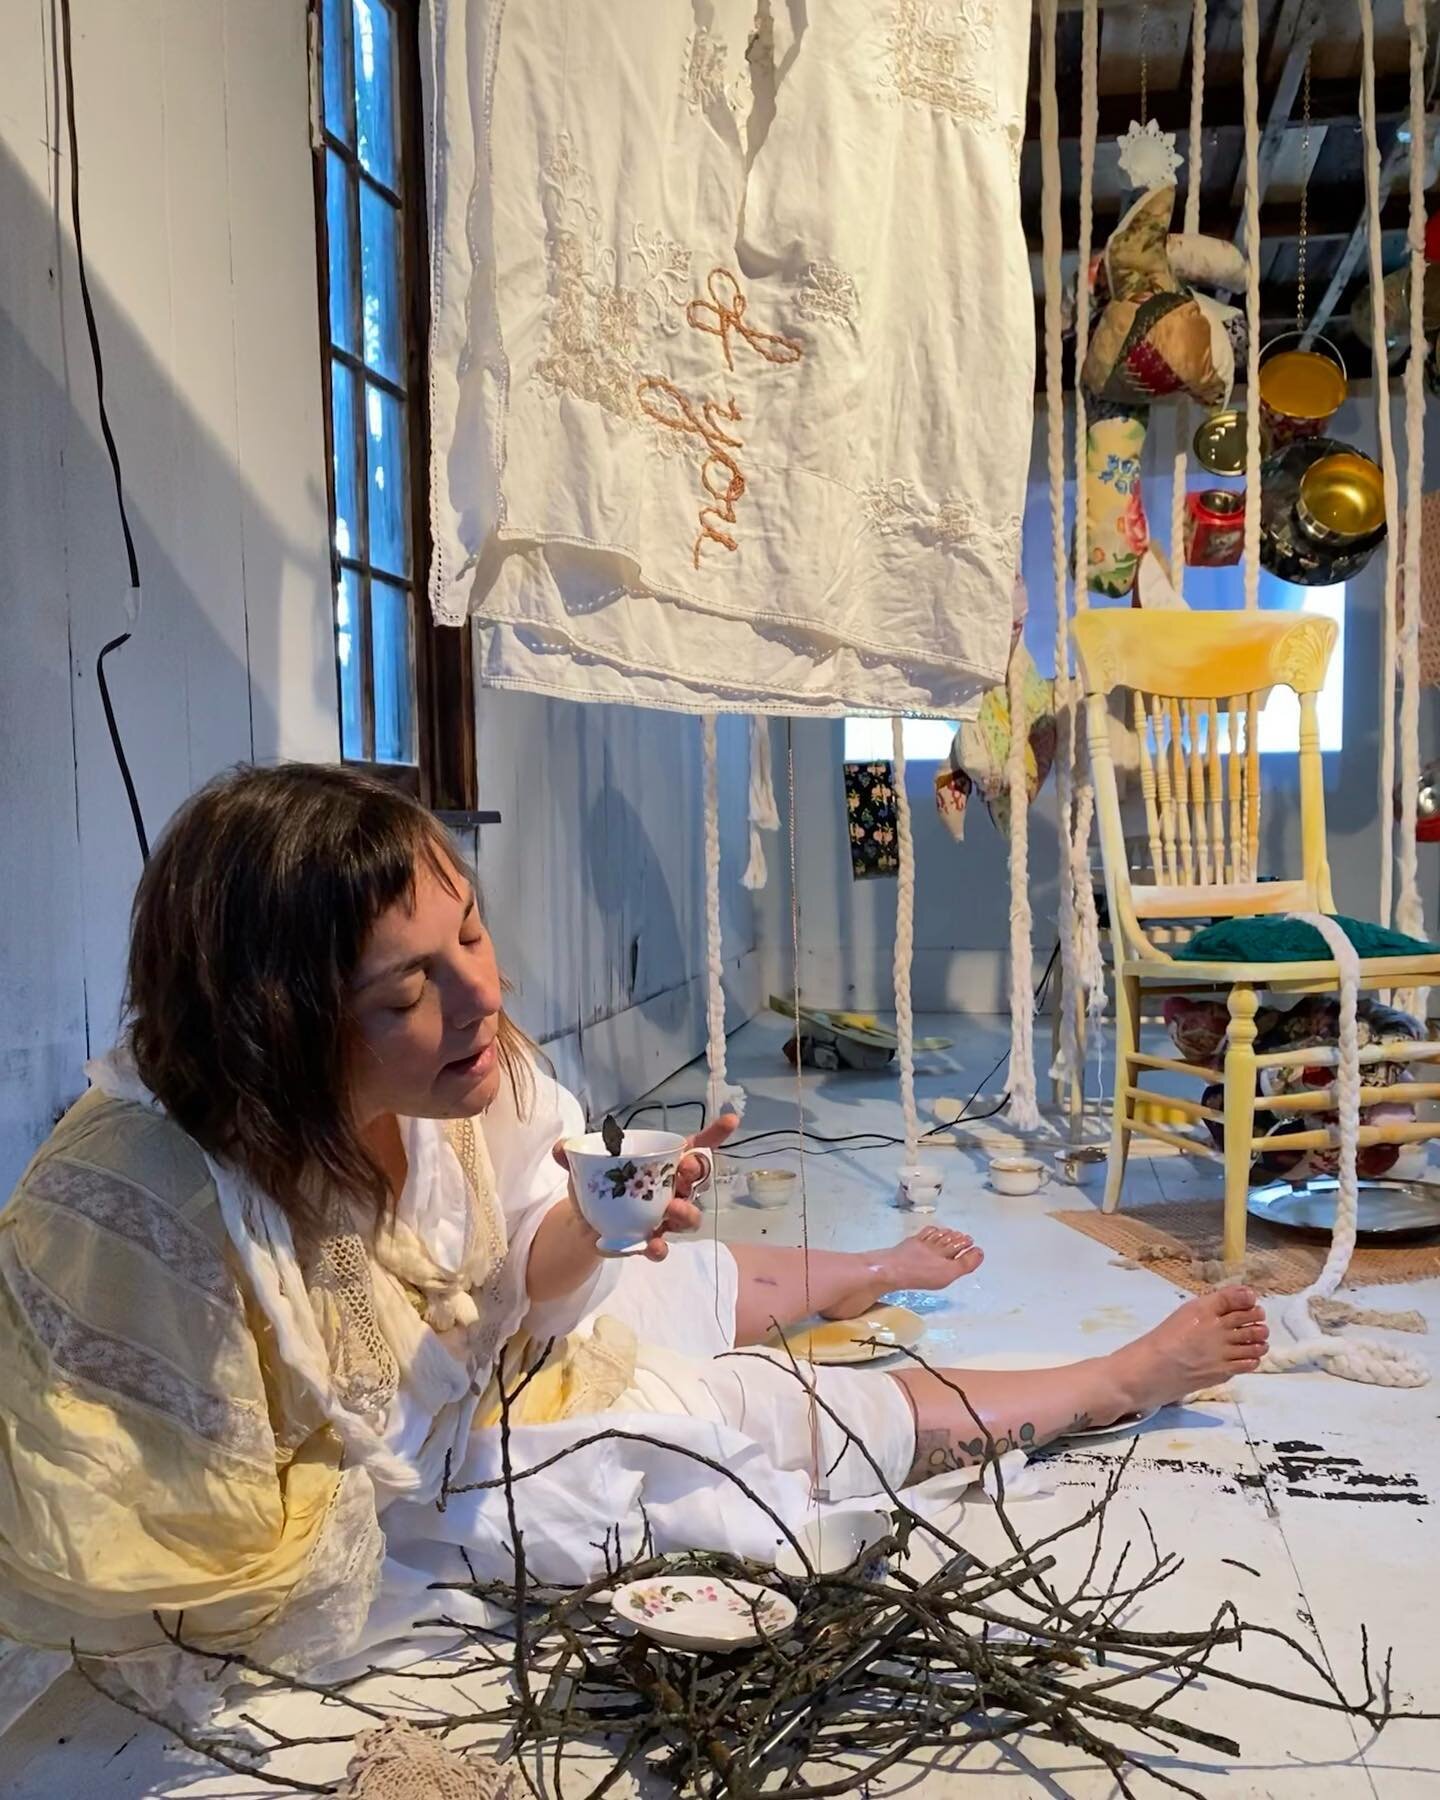 Rae Goodwin @goodwinrae performs &lsquo;Infertile Soil&rsquo; October 8 @glasshouse247 

Part of Glasshouse&rsquo;s 15th season titled &lsquo;the captive spectator- on the  otherhood in motherhood&lsquo;

#upstateart #upstateny #performanceart #archi